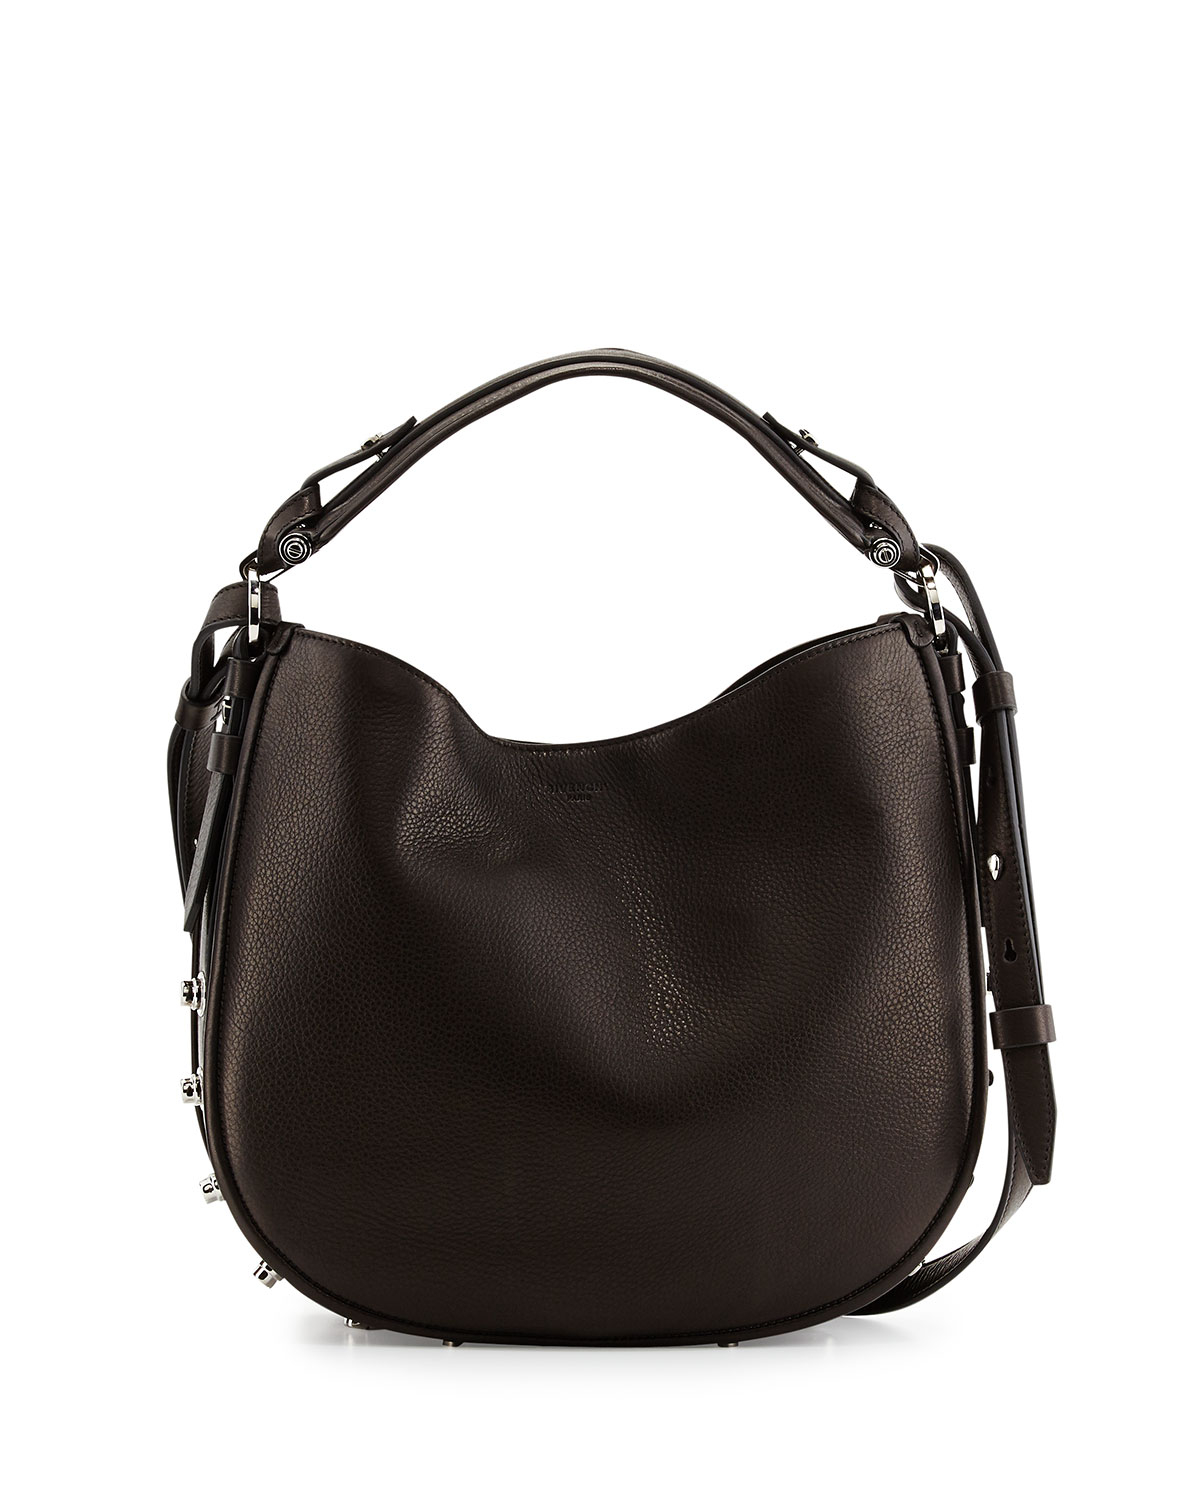 Givenchy Obsedia Small Nail-head Hobo Bag in Black (GRAY) | Lyst